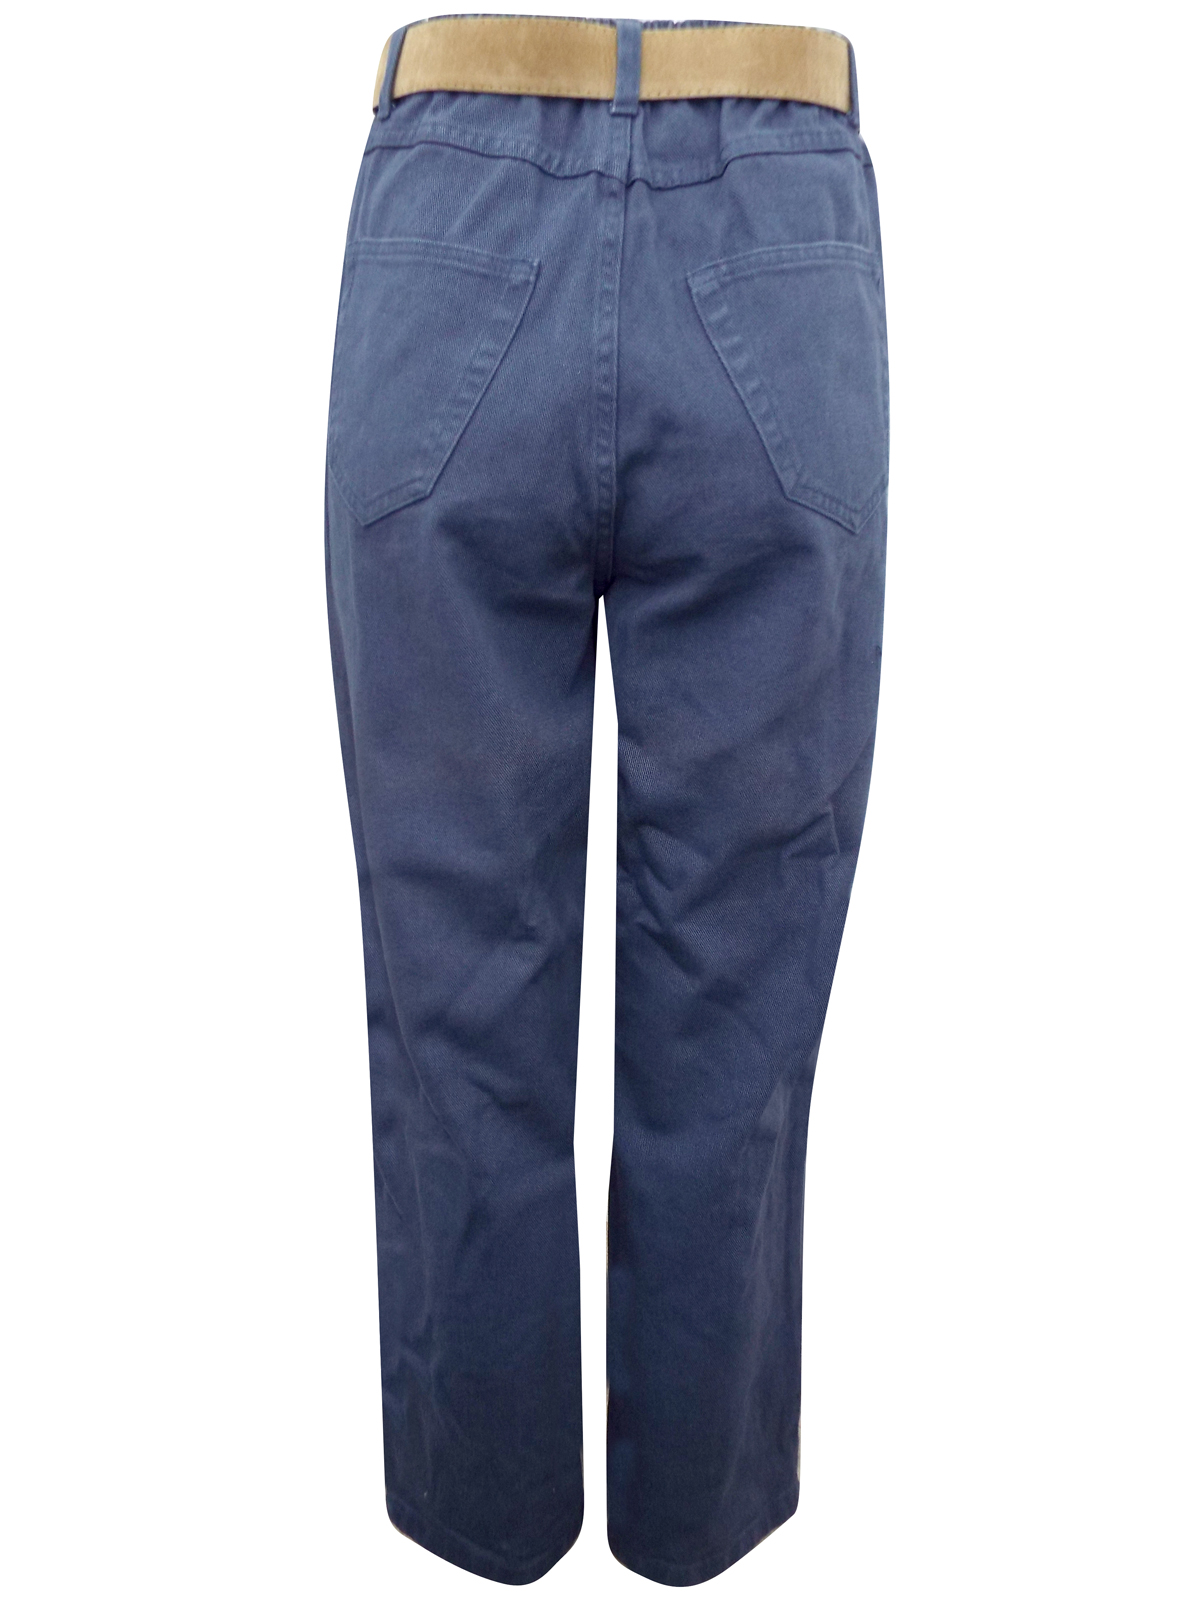 BHS - - BH5 BLUE Pure Cotton Belted Chinos - Plus Size 20